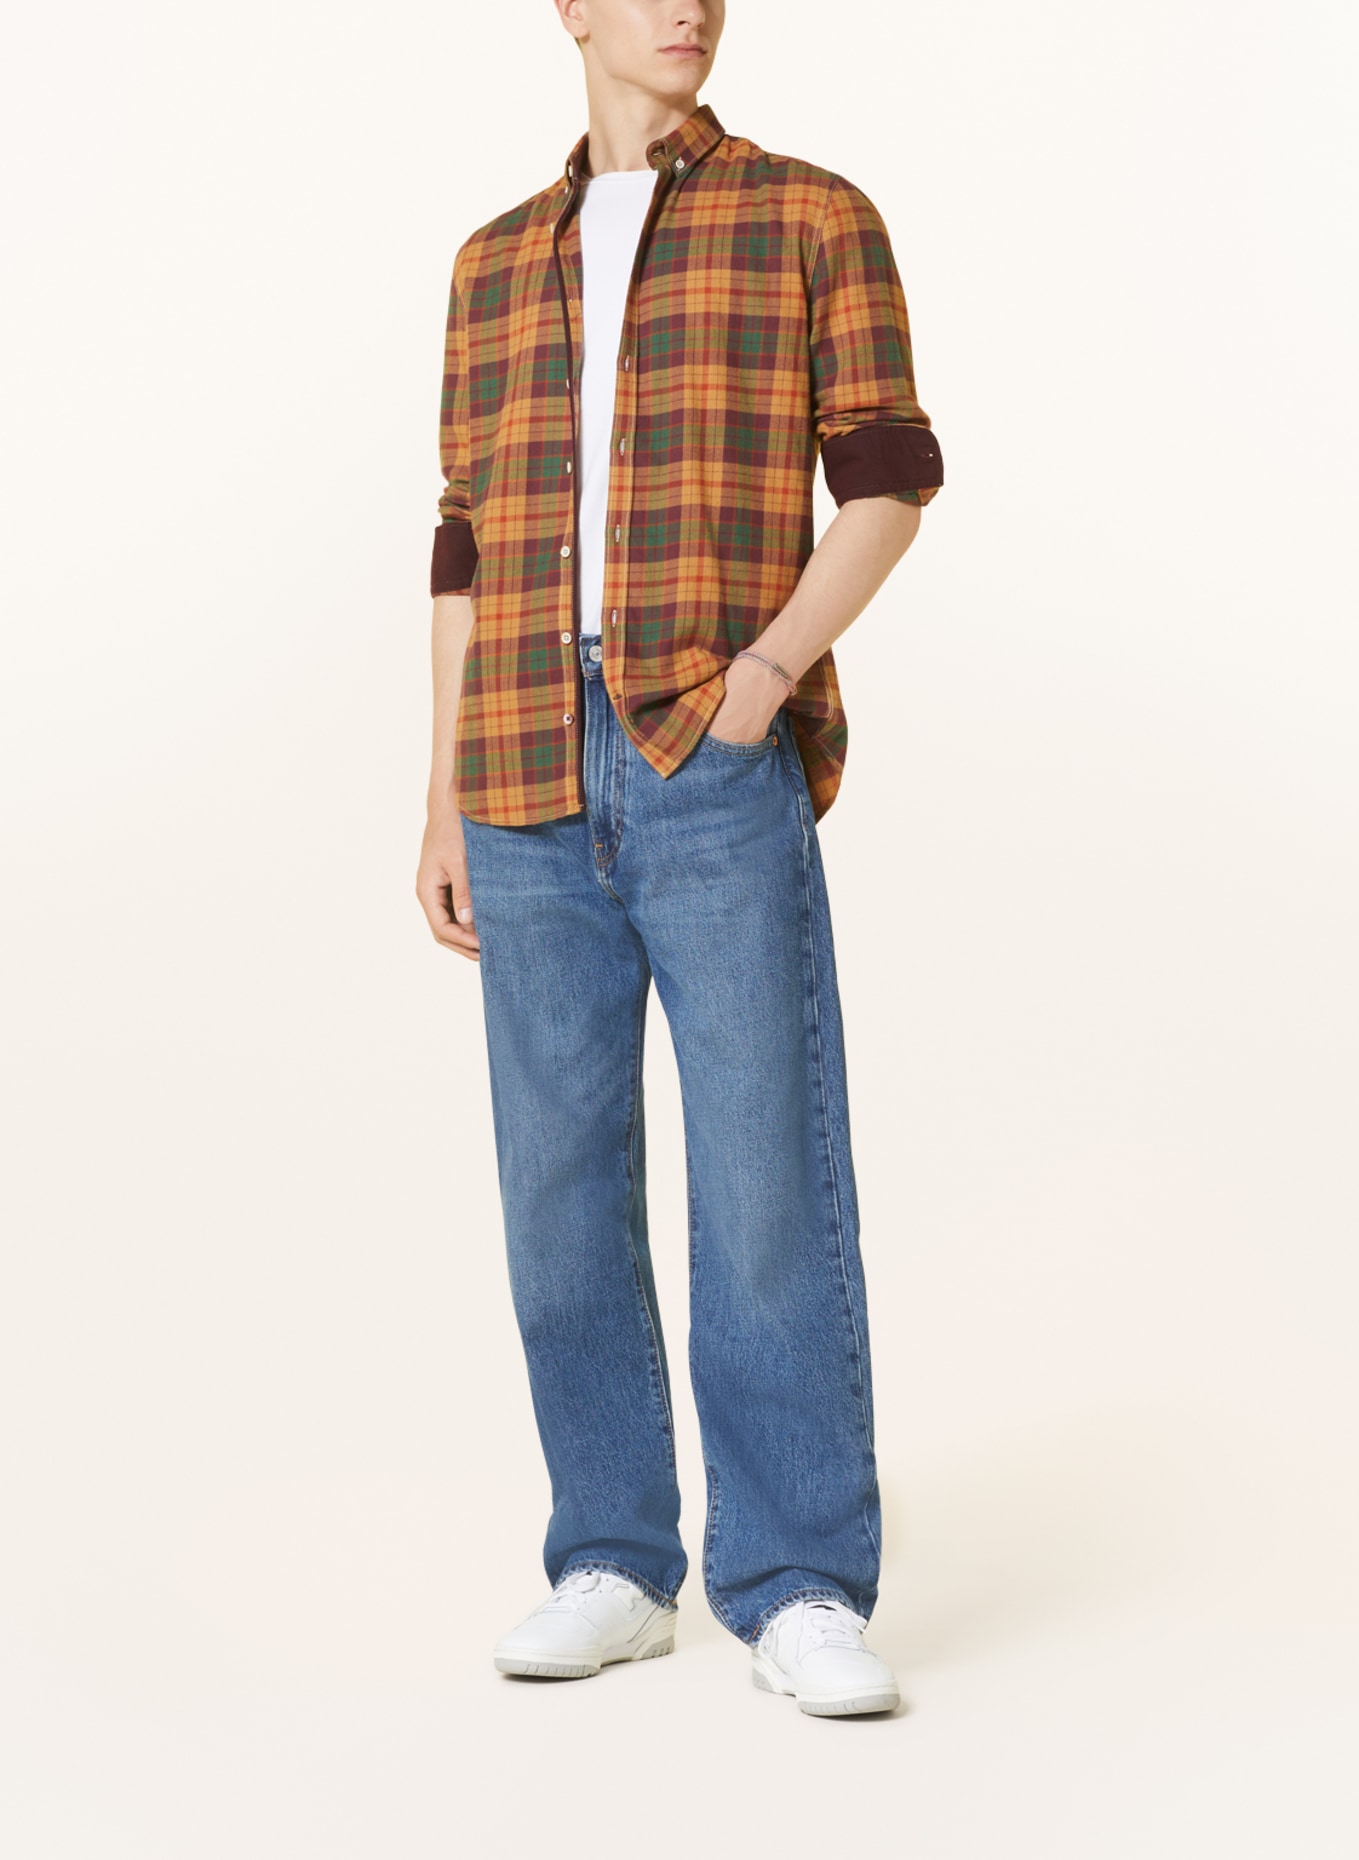 COLOURS & SONS Flannel shirt casual fit, Color: CAMEL/ GREEN/ ORANGE (Image 2)